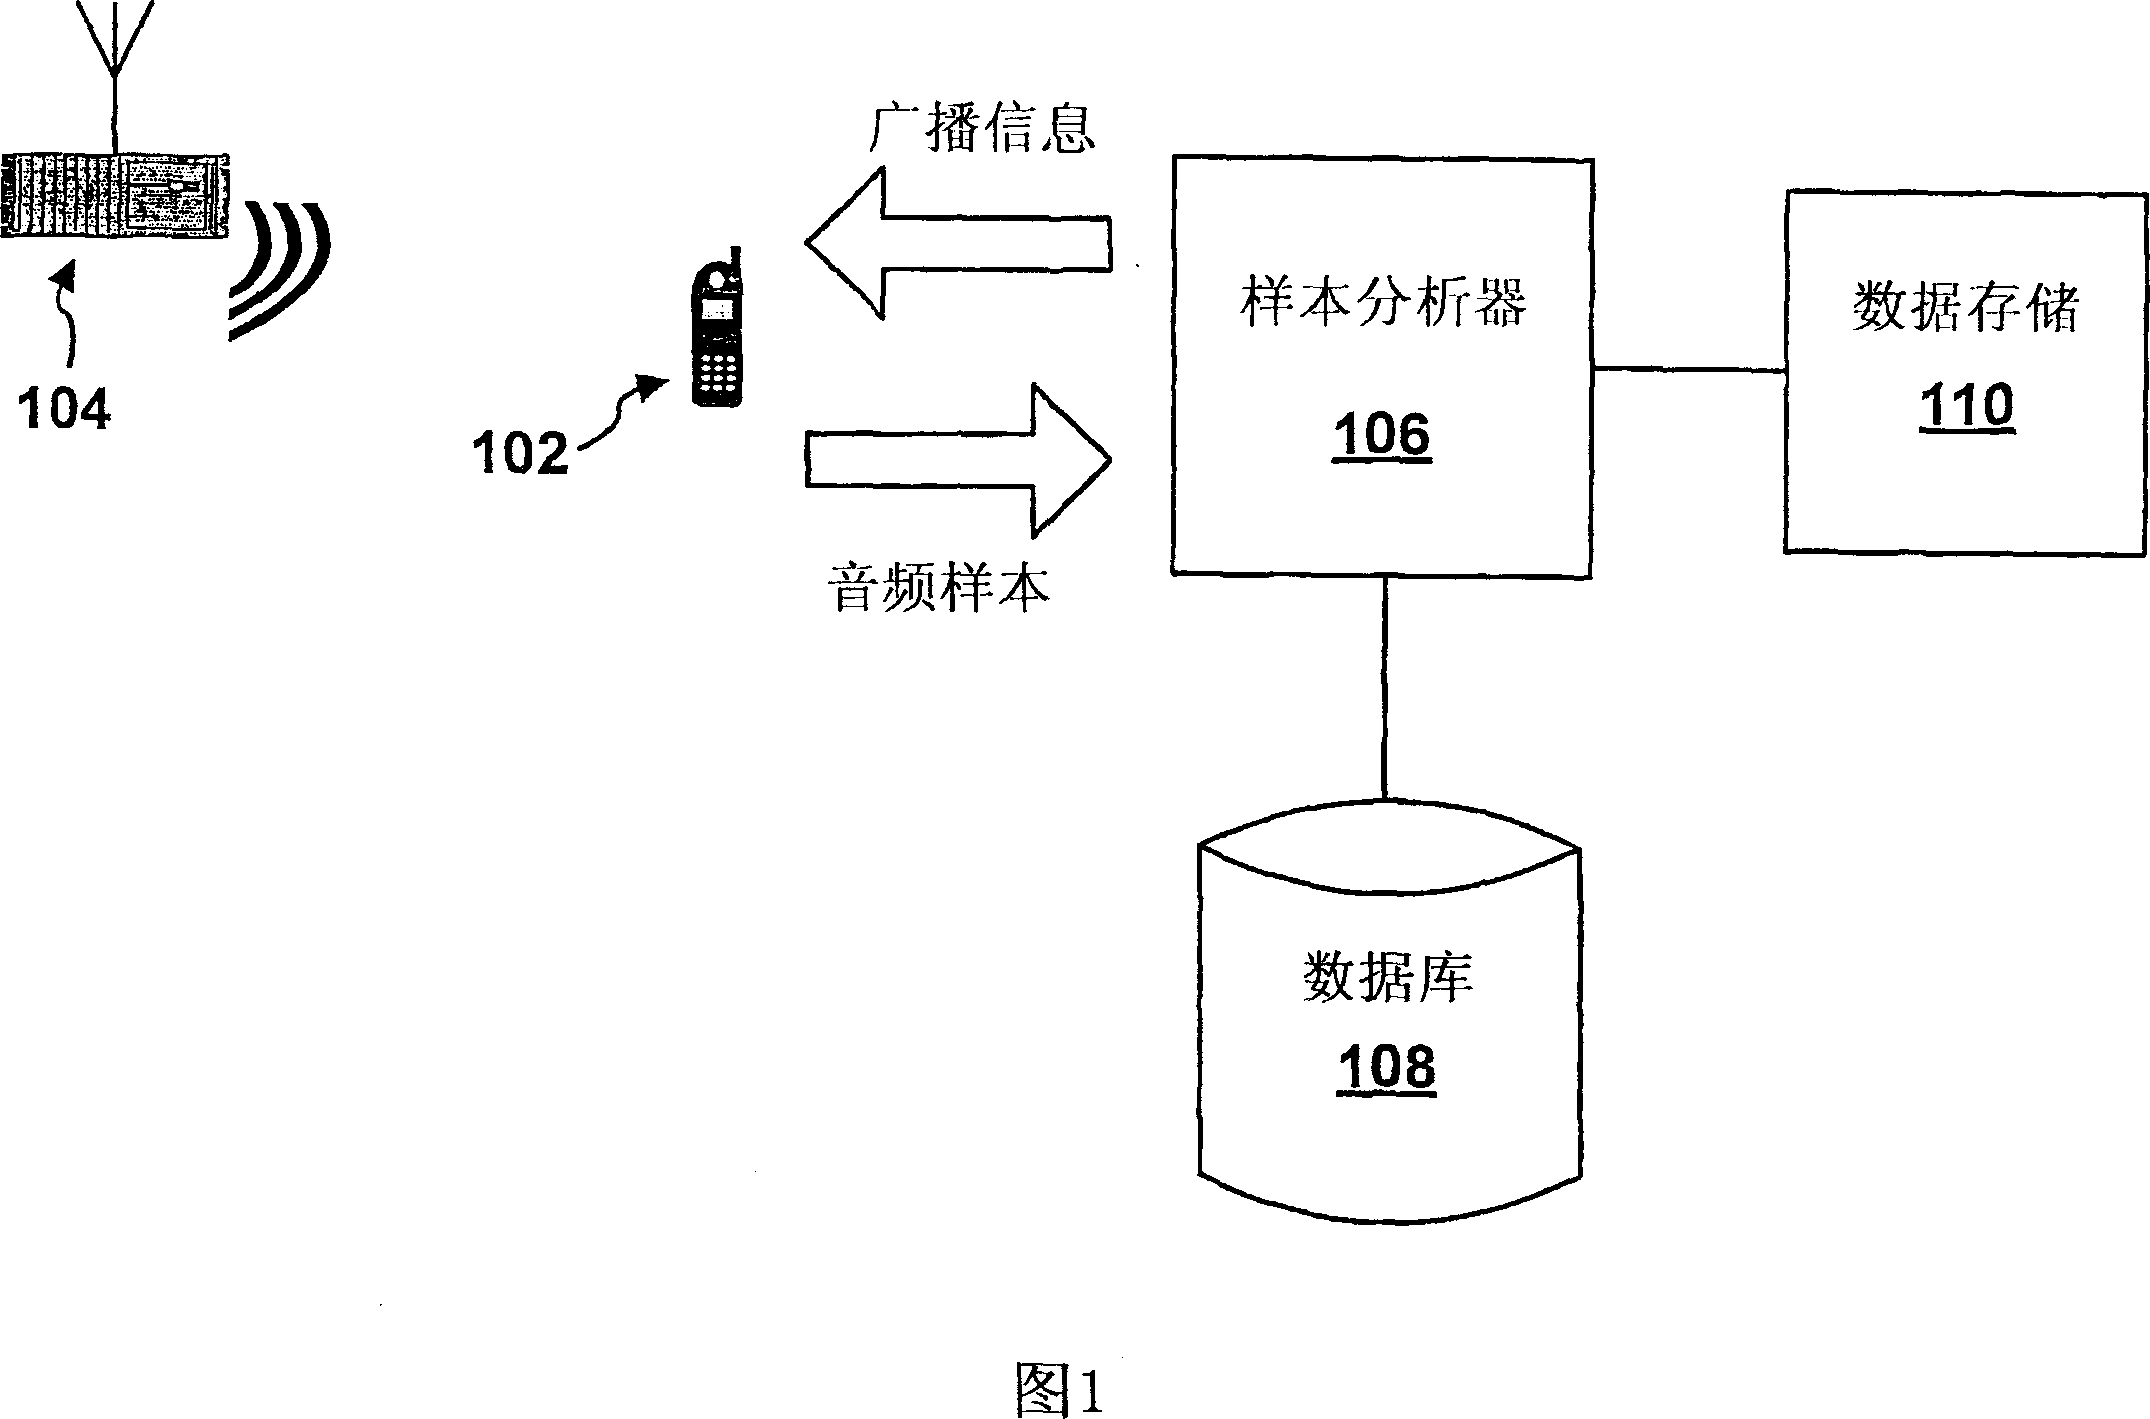 Method and apparatus for identification of broadcast source